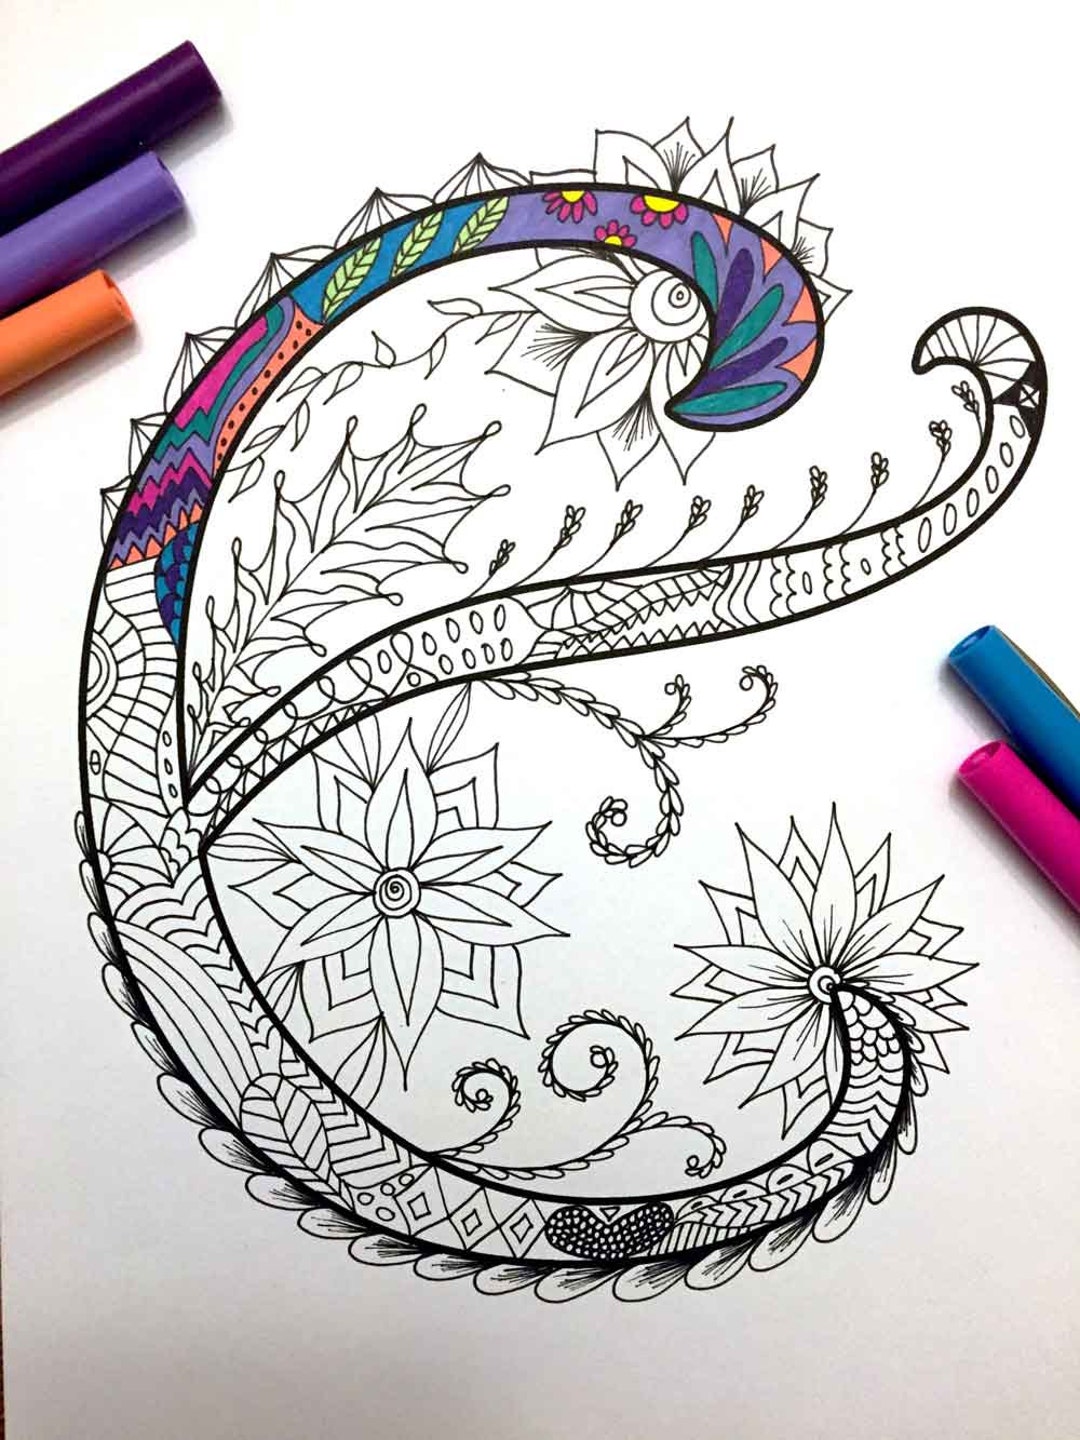 Letter E Coloring Page Inspired by the Font - Etsy